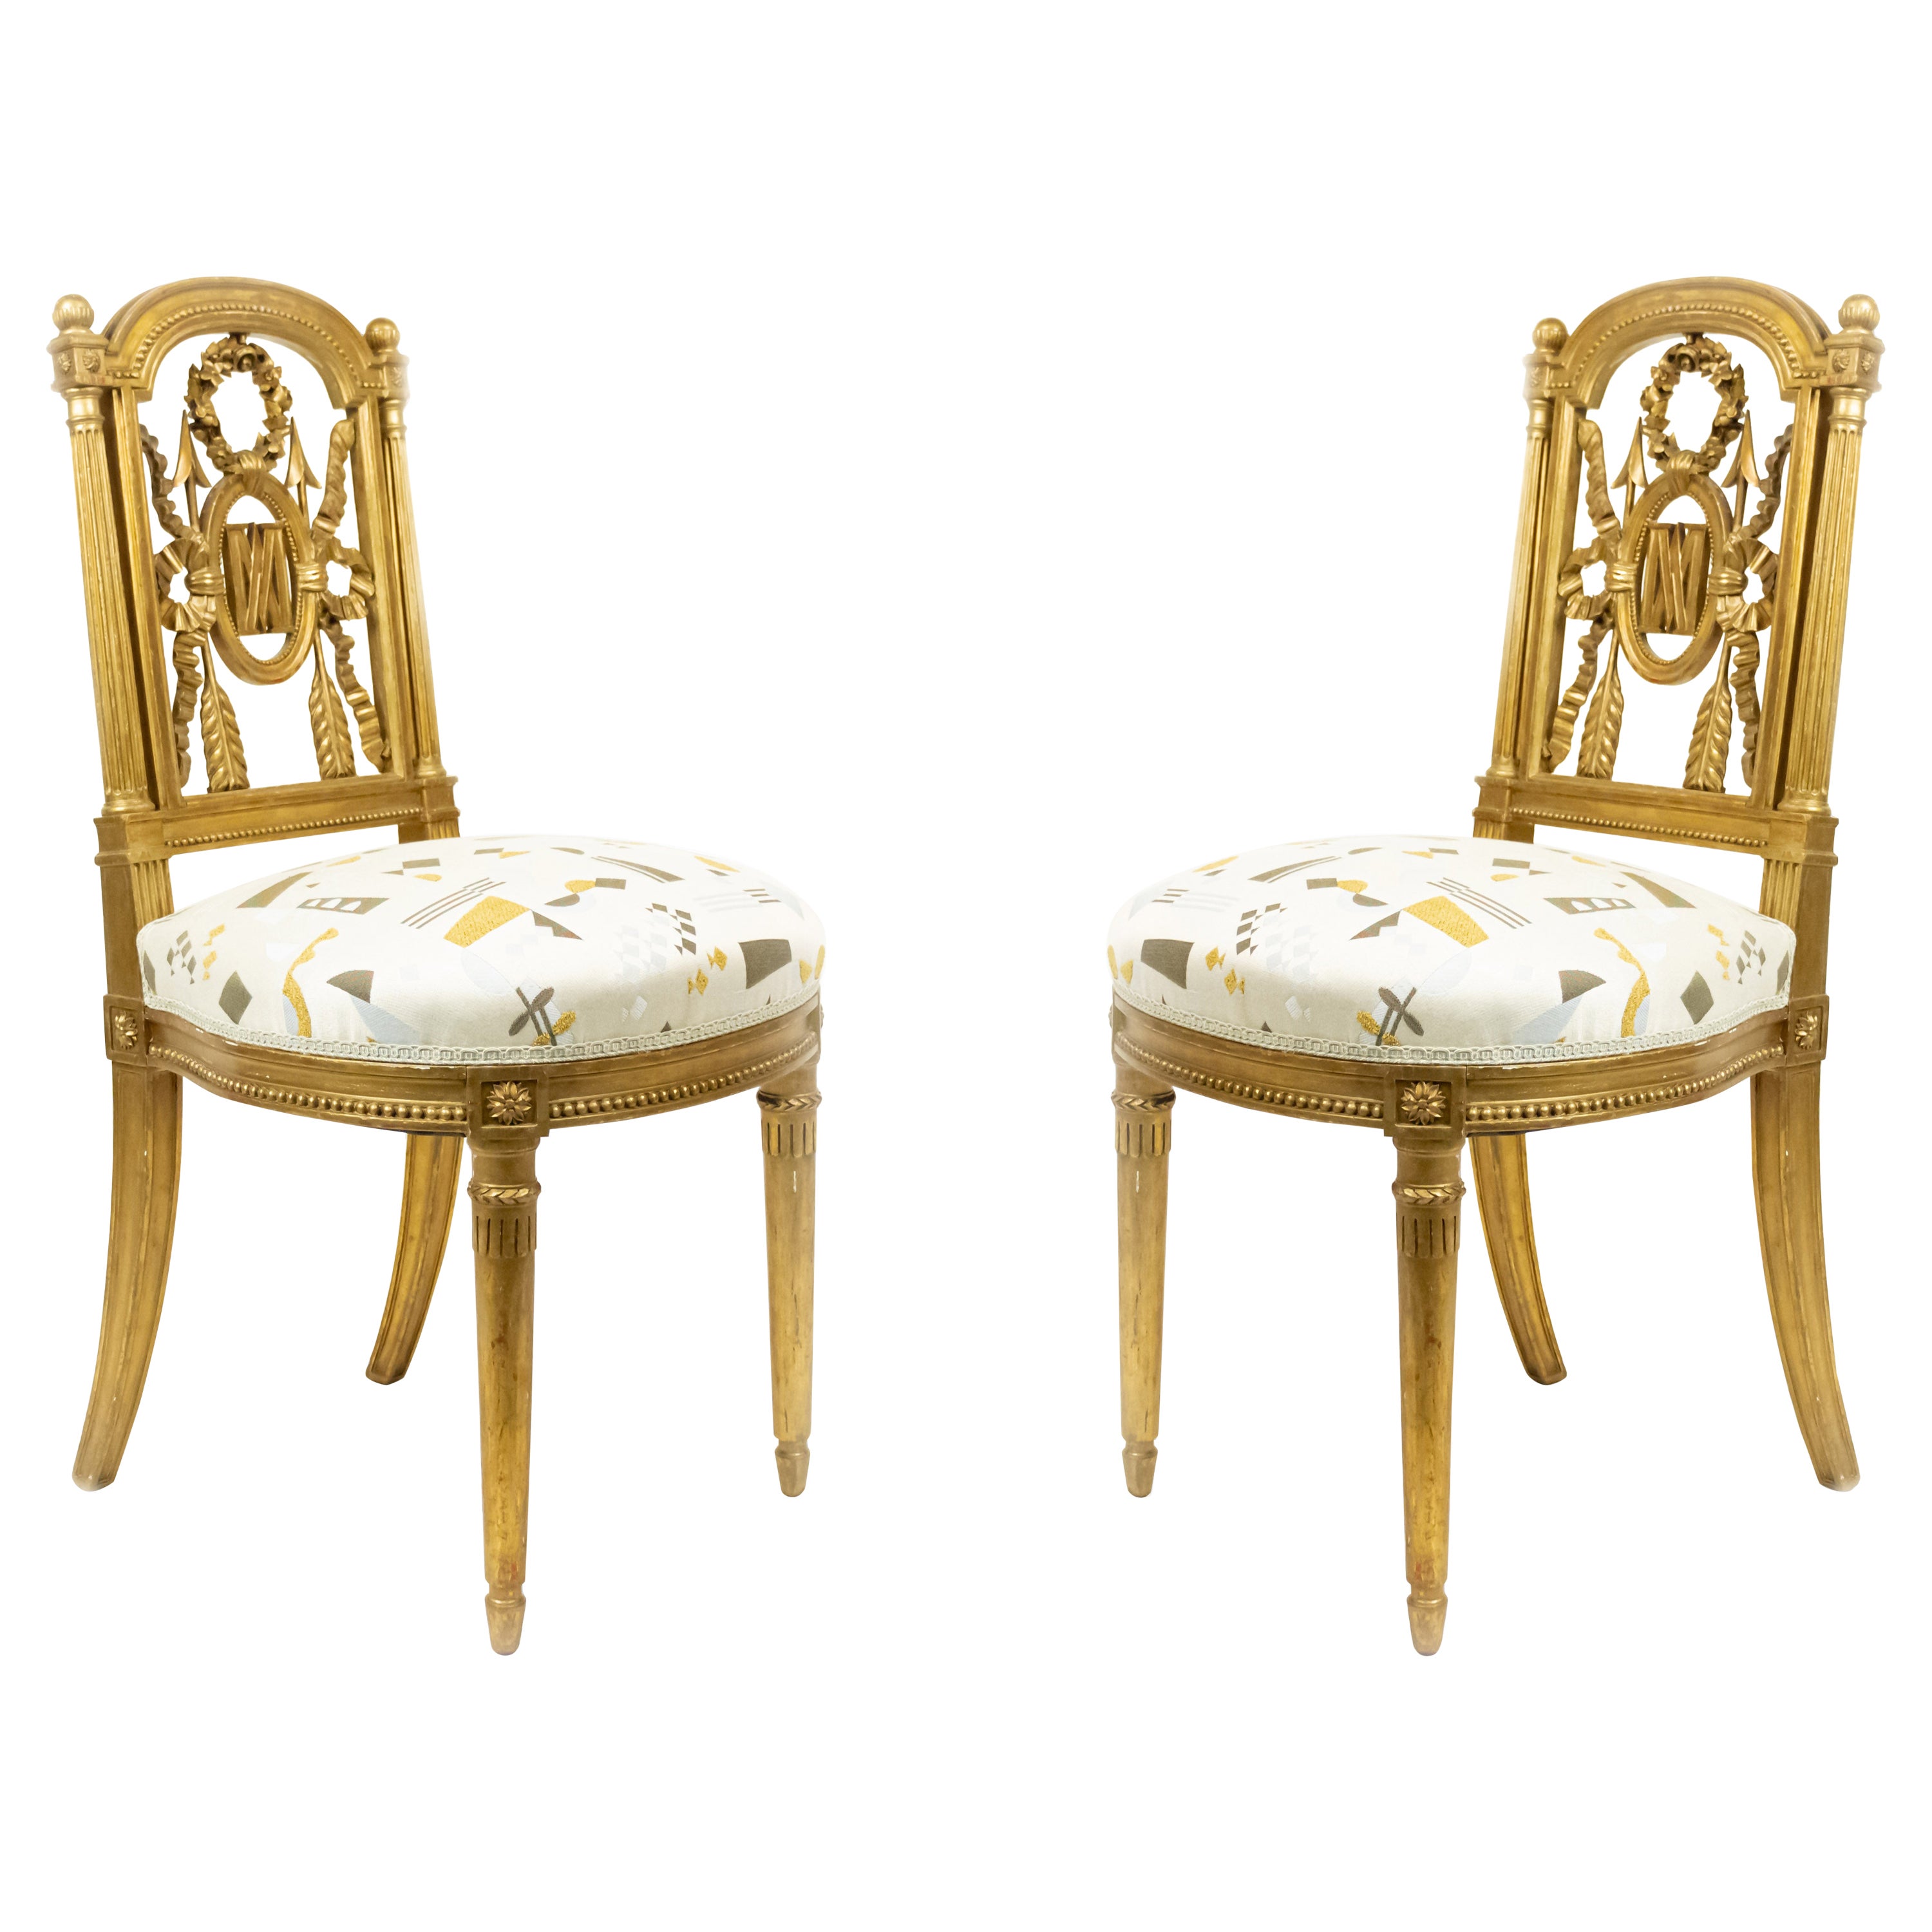 Pair of 19th Century French Louis XVI Gilt Style Side Chairs 